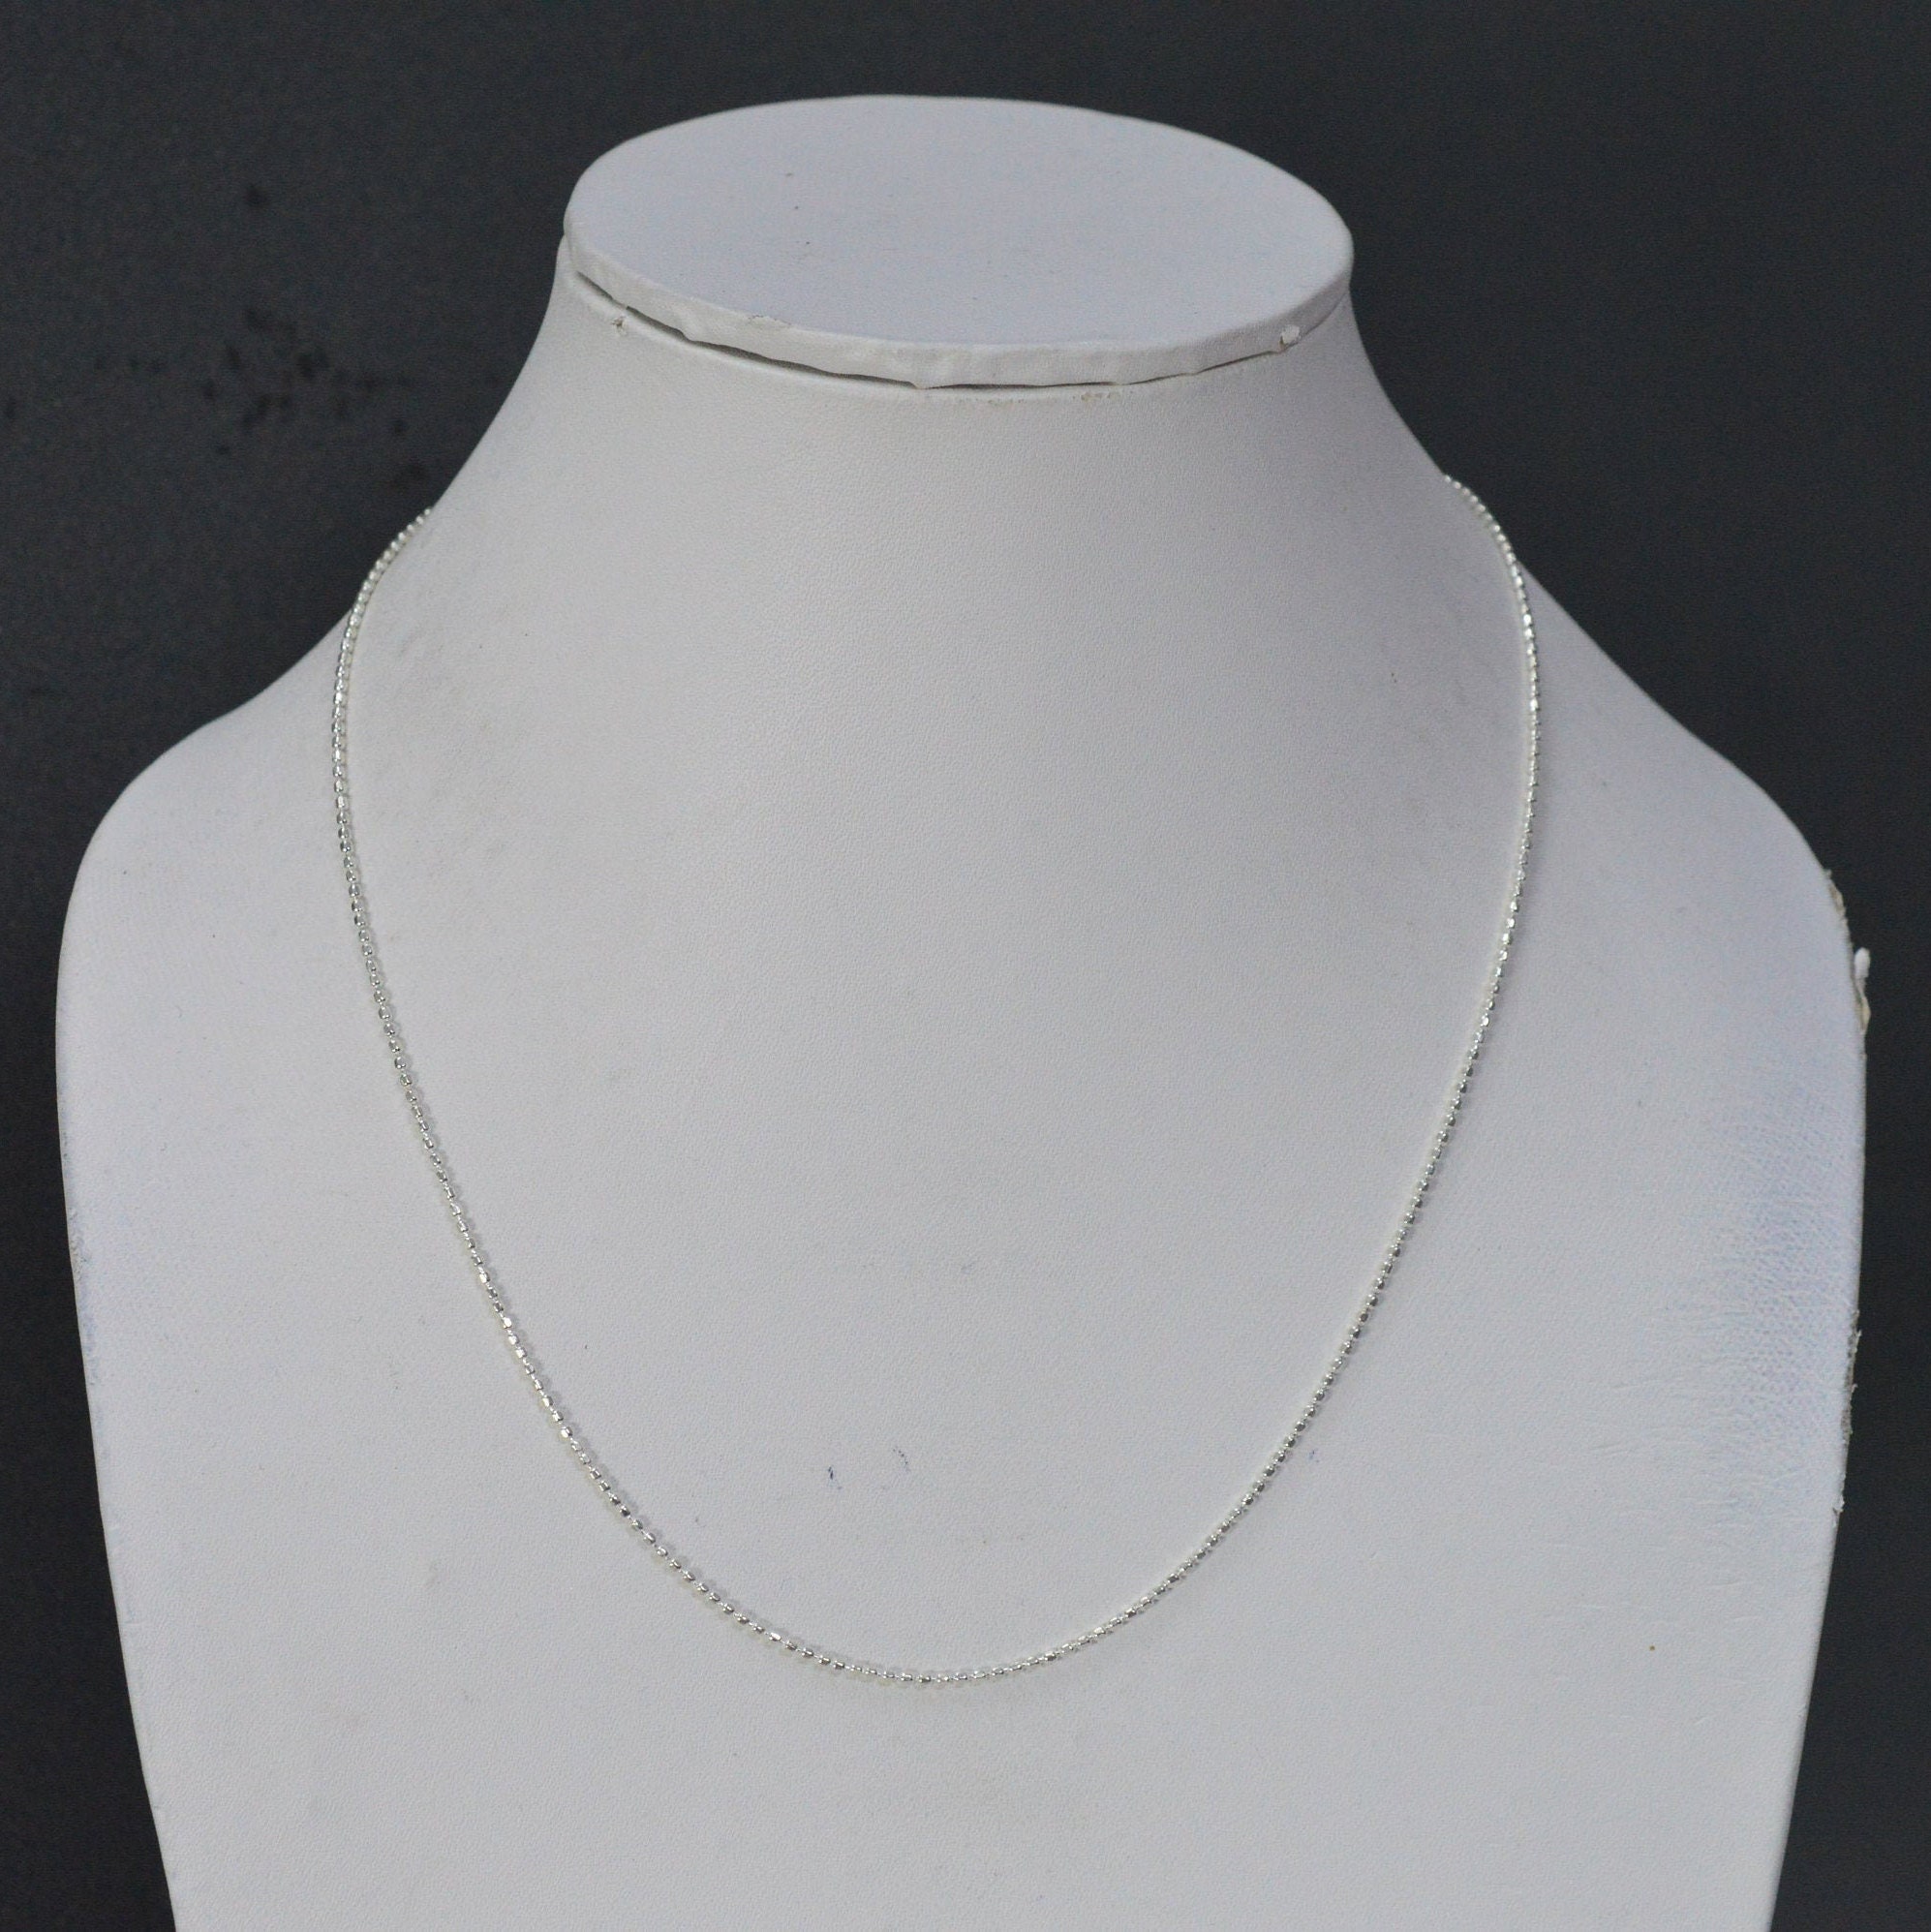 Fine Beaded Chain Necklace Adjustable 41-46cm/16-18' in Sterling Silver